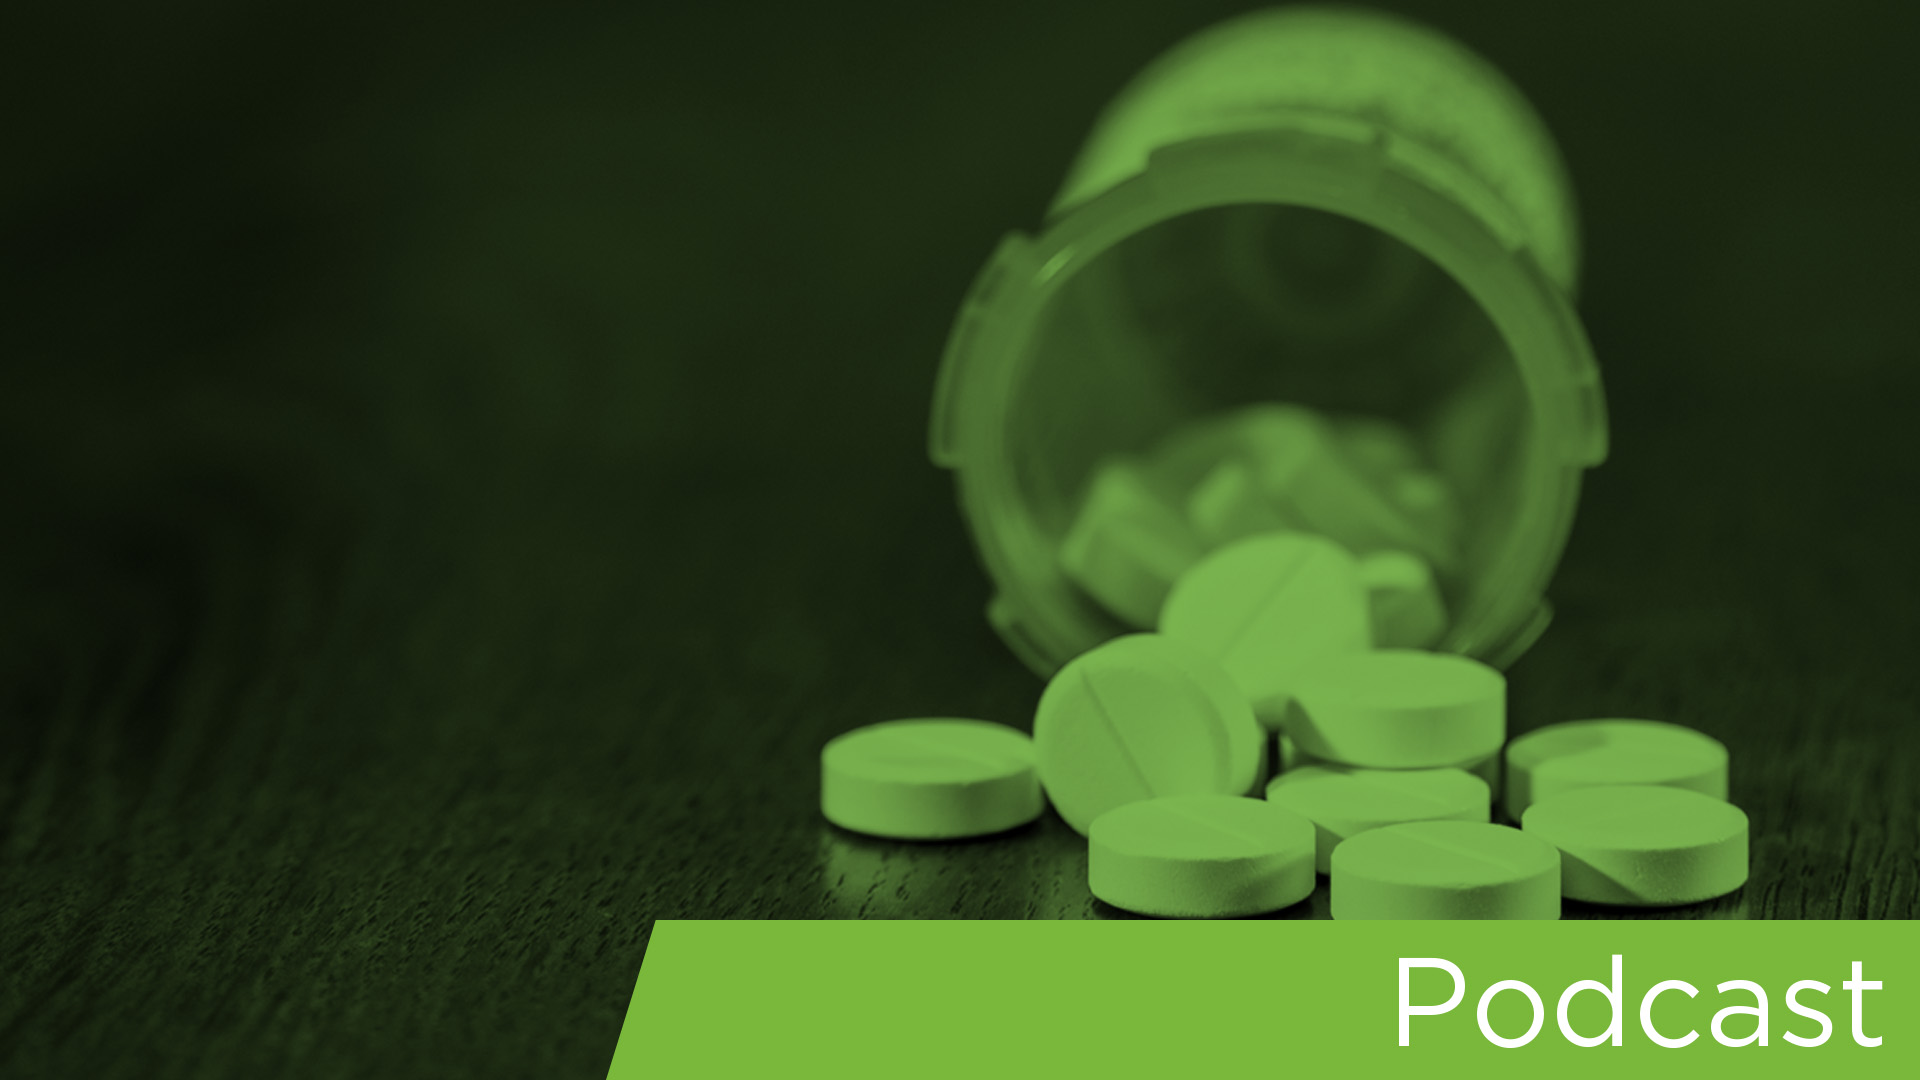 Podcast 140 image_Can federal laws tackle the opioid crisis_green overlay